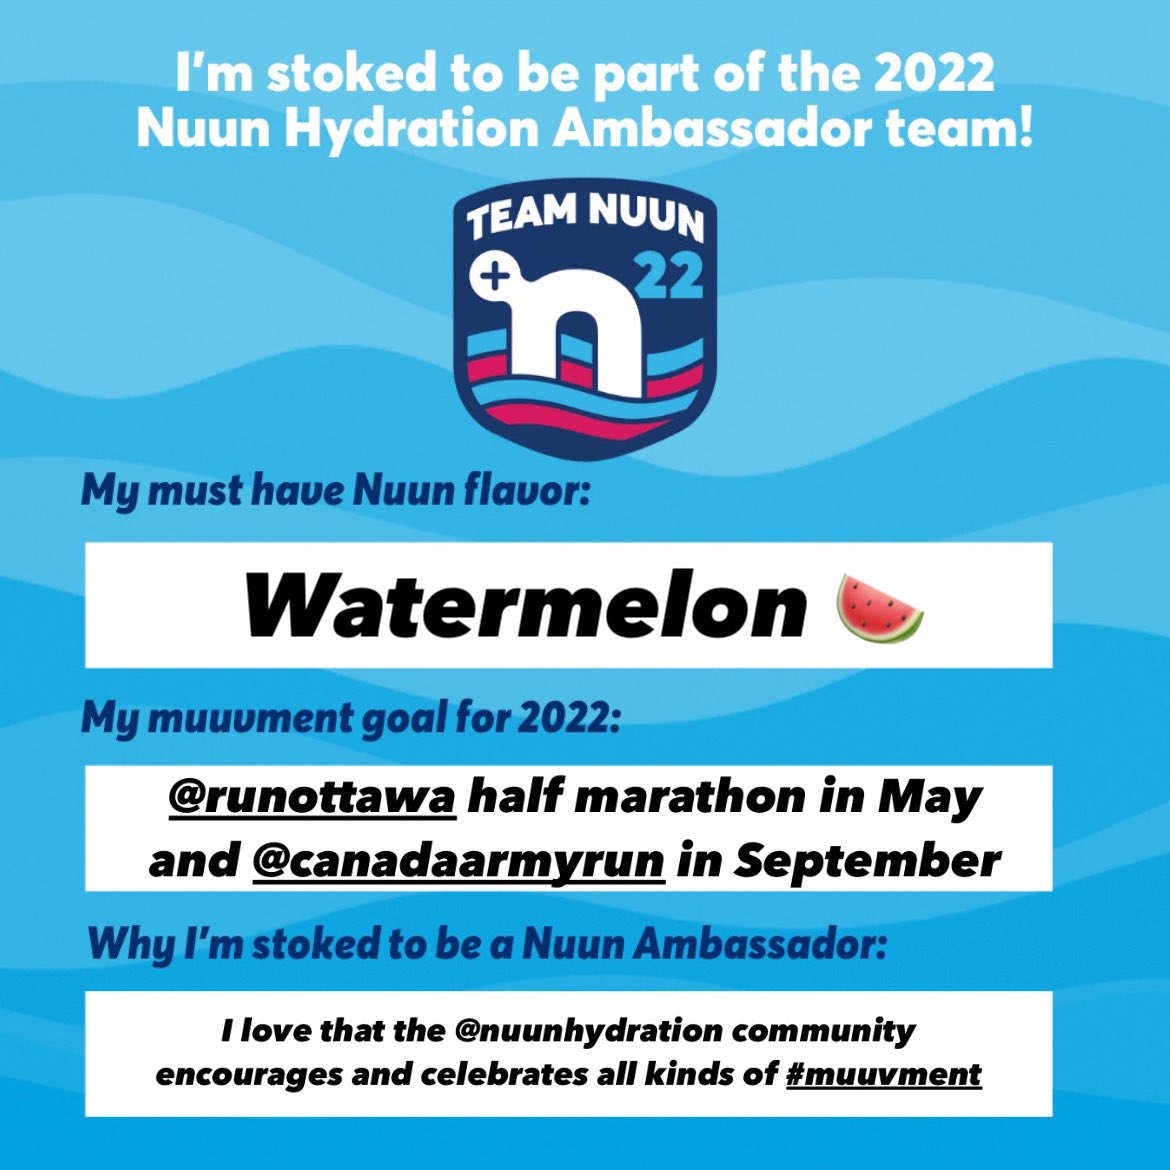 Super excited to be back with #teamnuun this year! @nuunhydration #nuunlove #muuvment #nuunlife